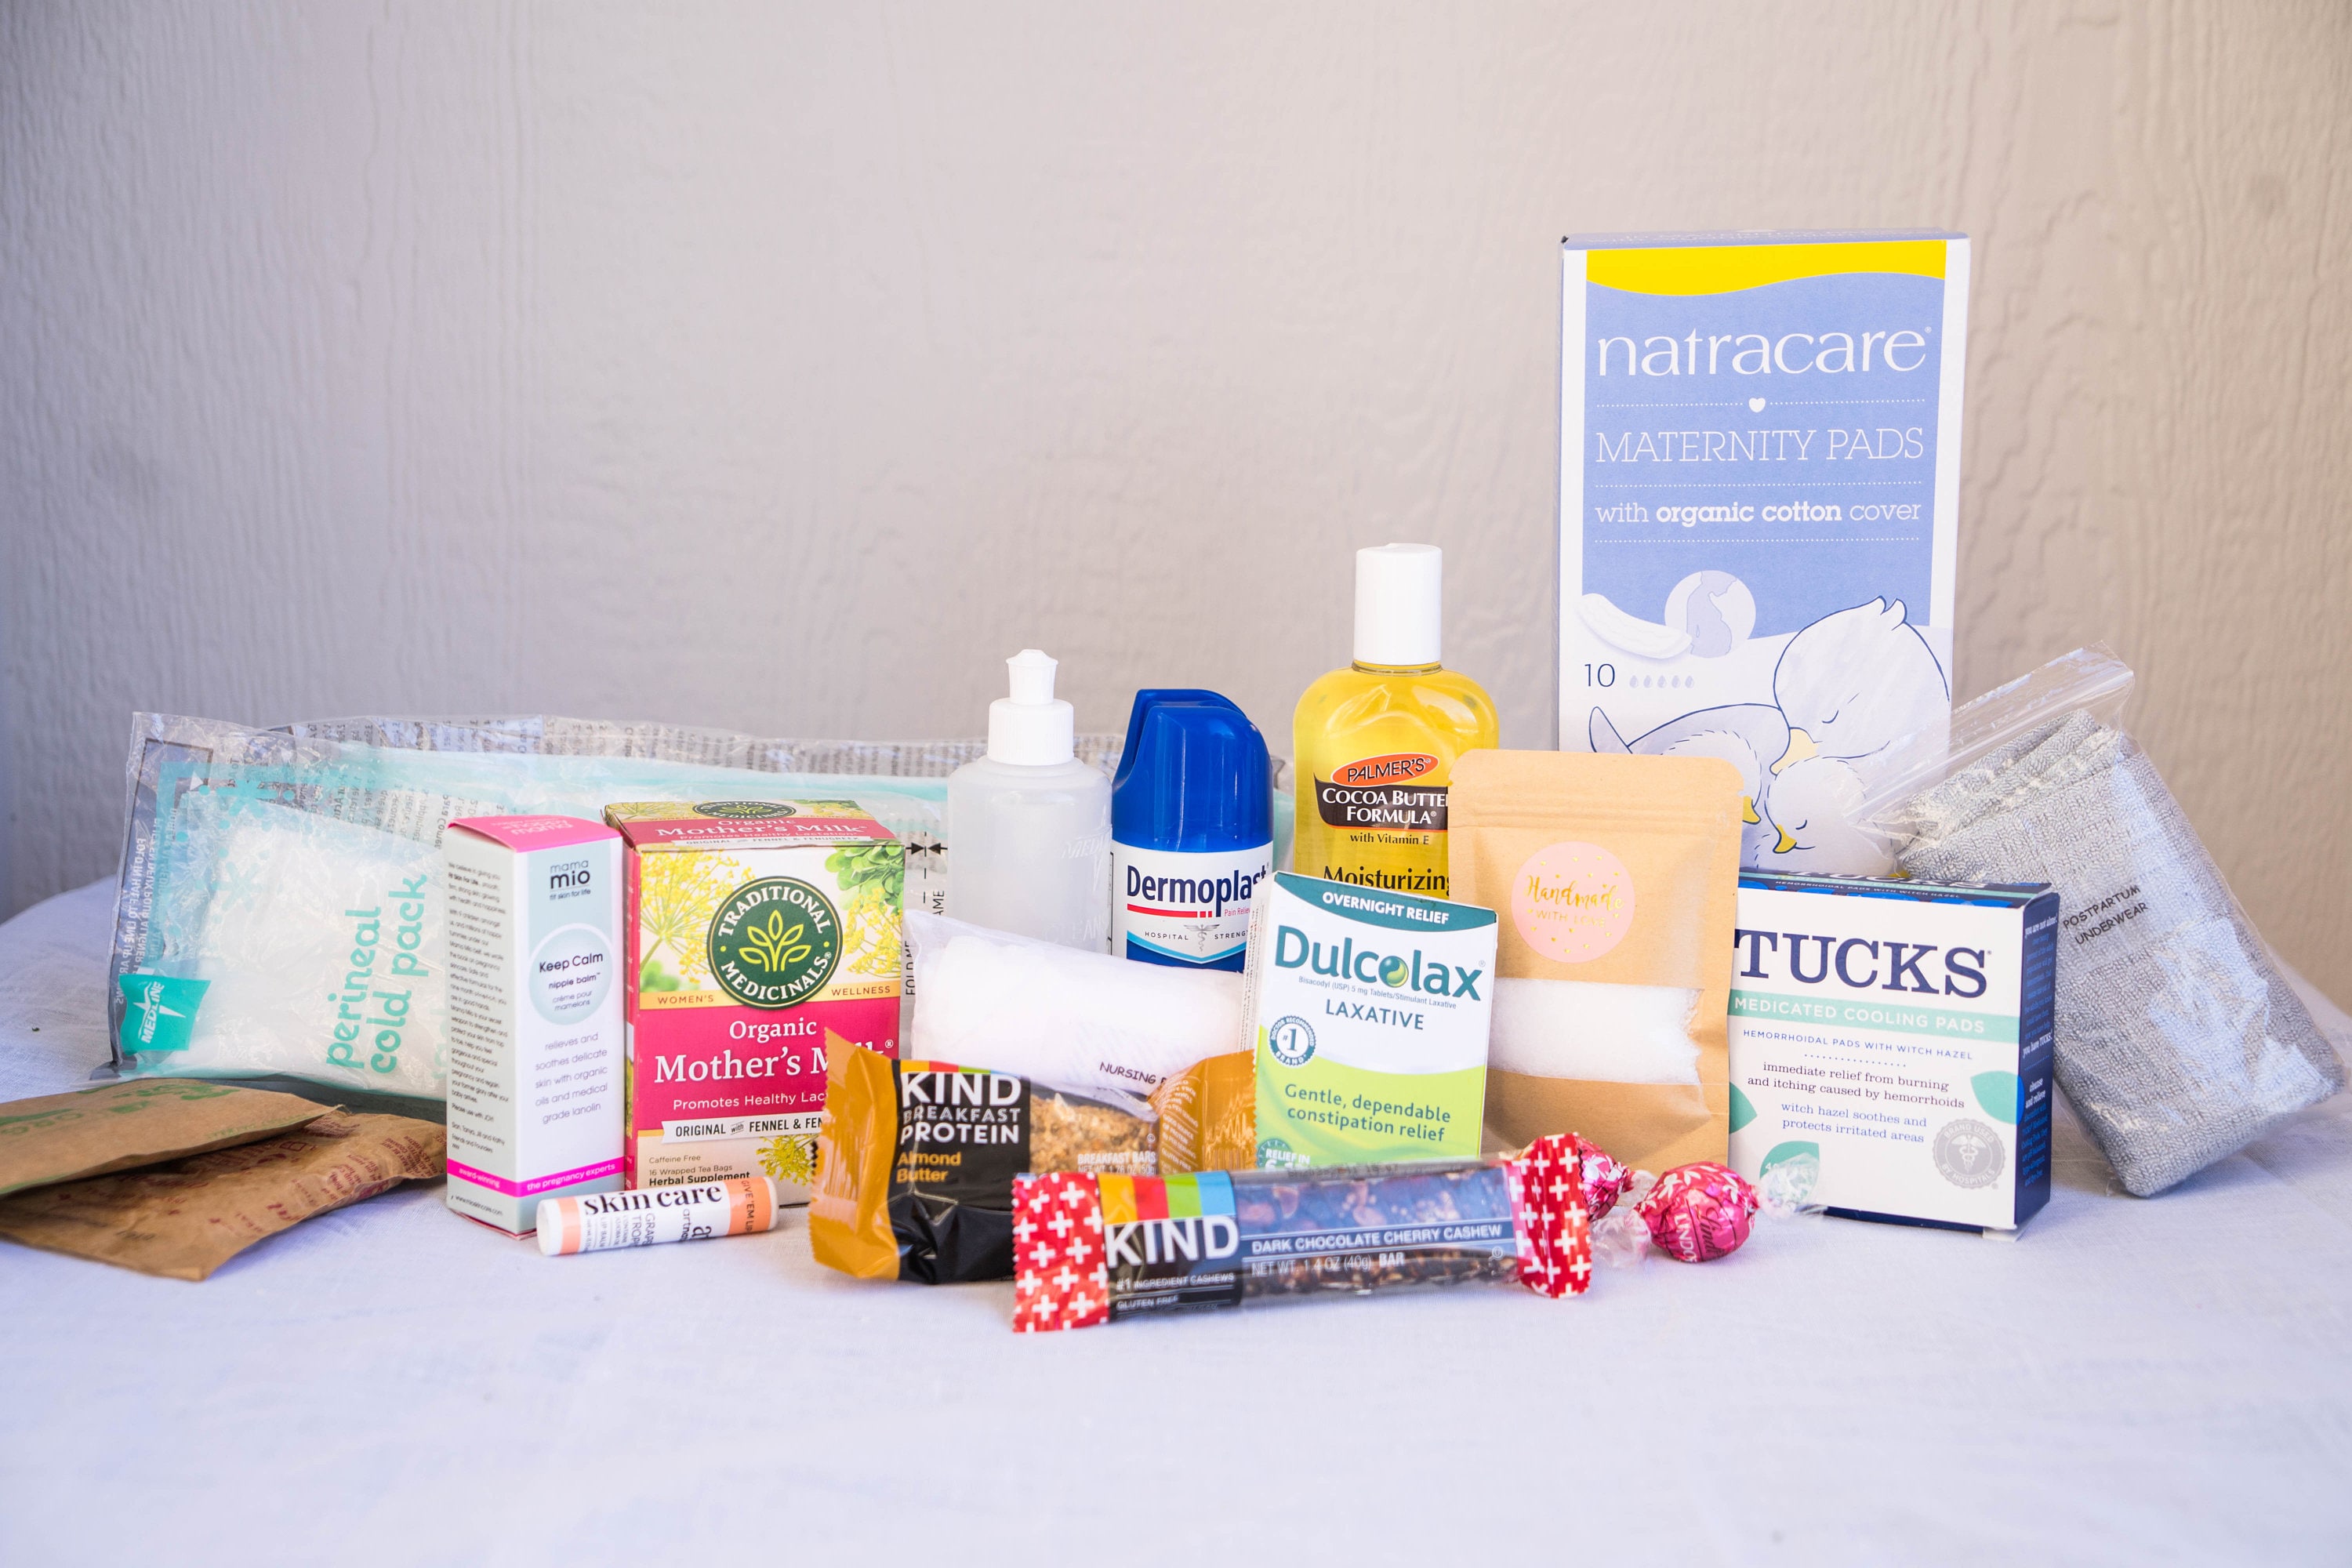 Importikaah - Pregnancy Care, Personal Care Products Online Shop